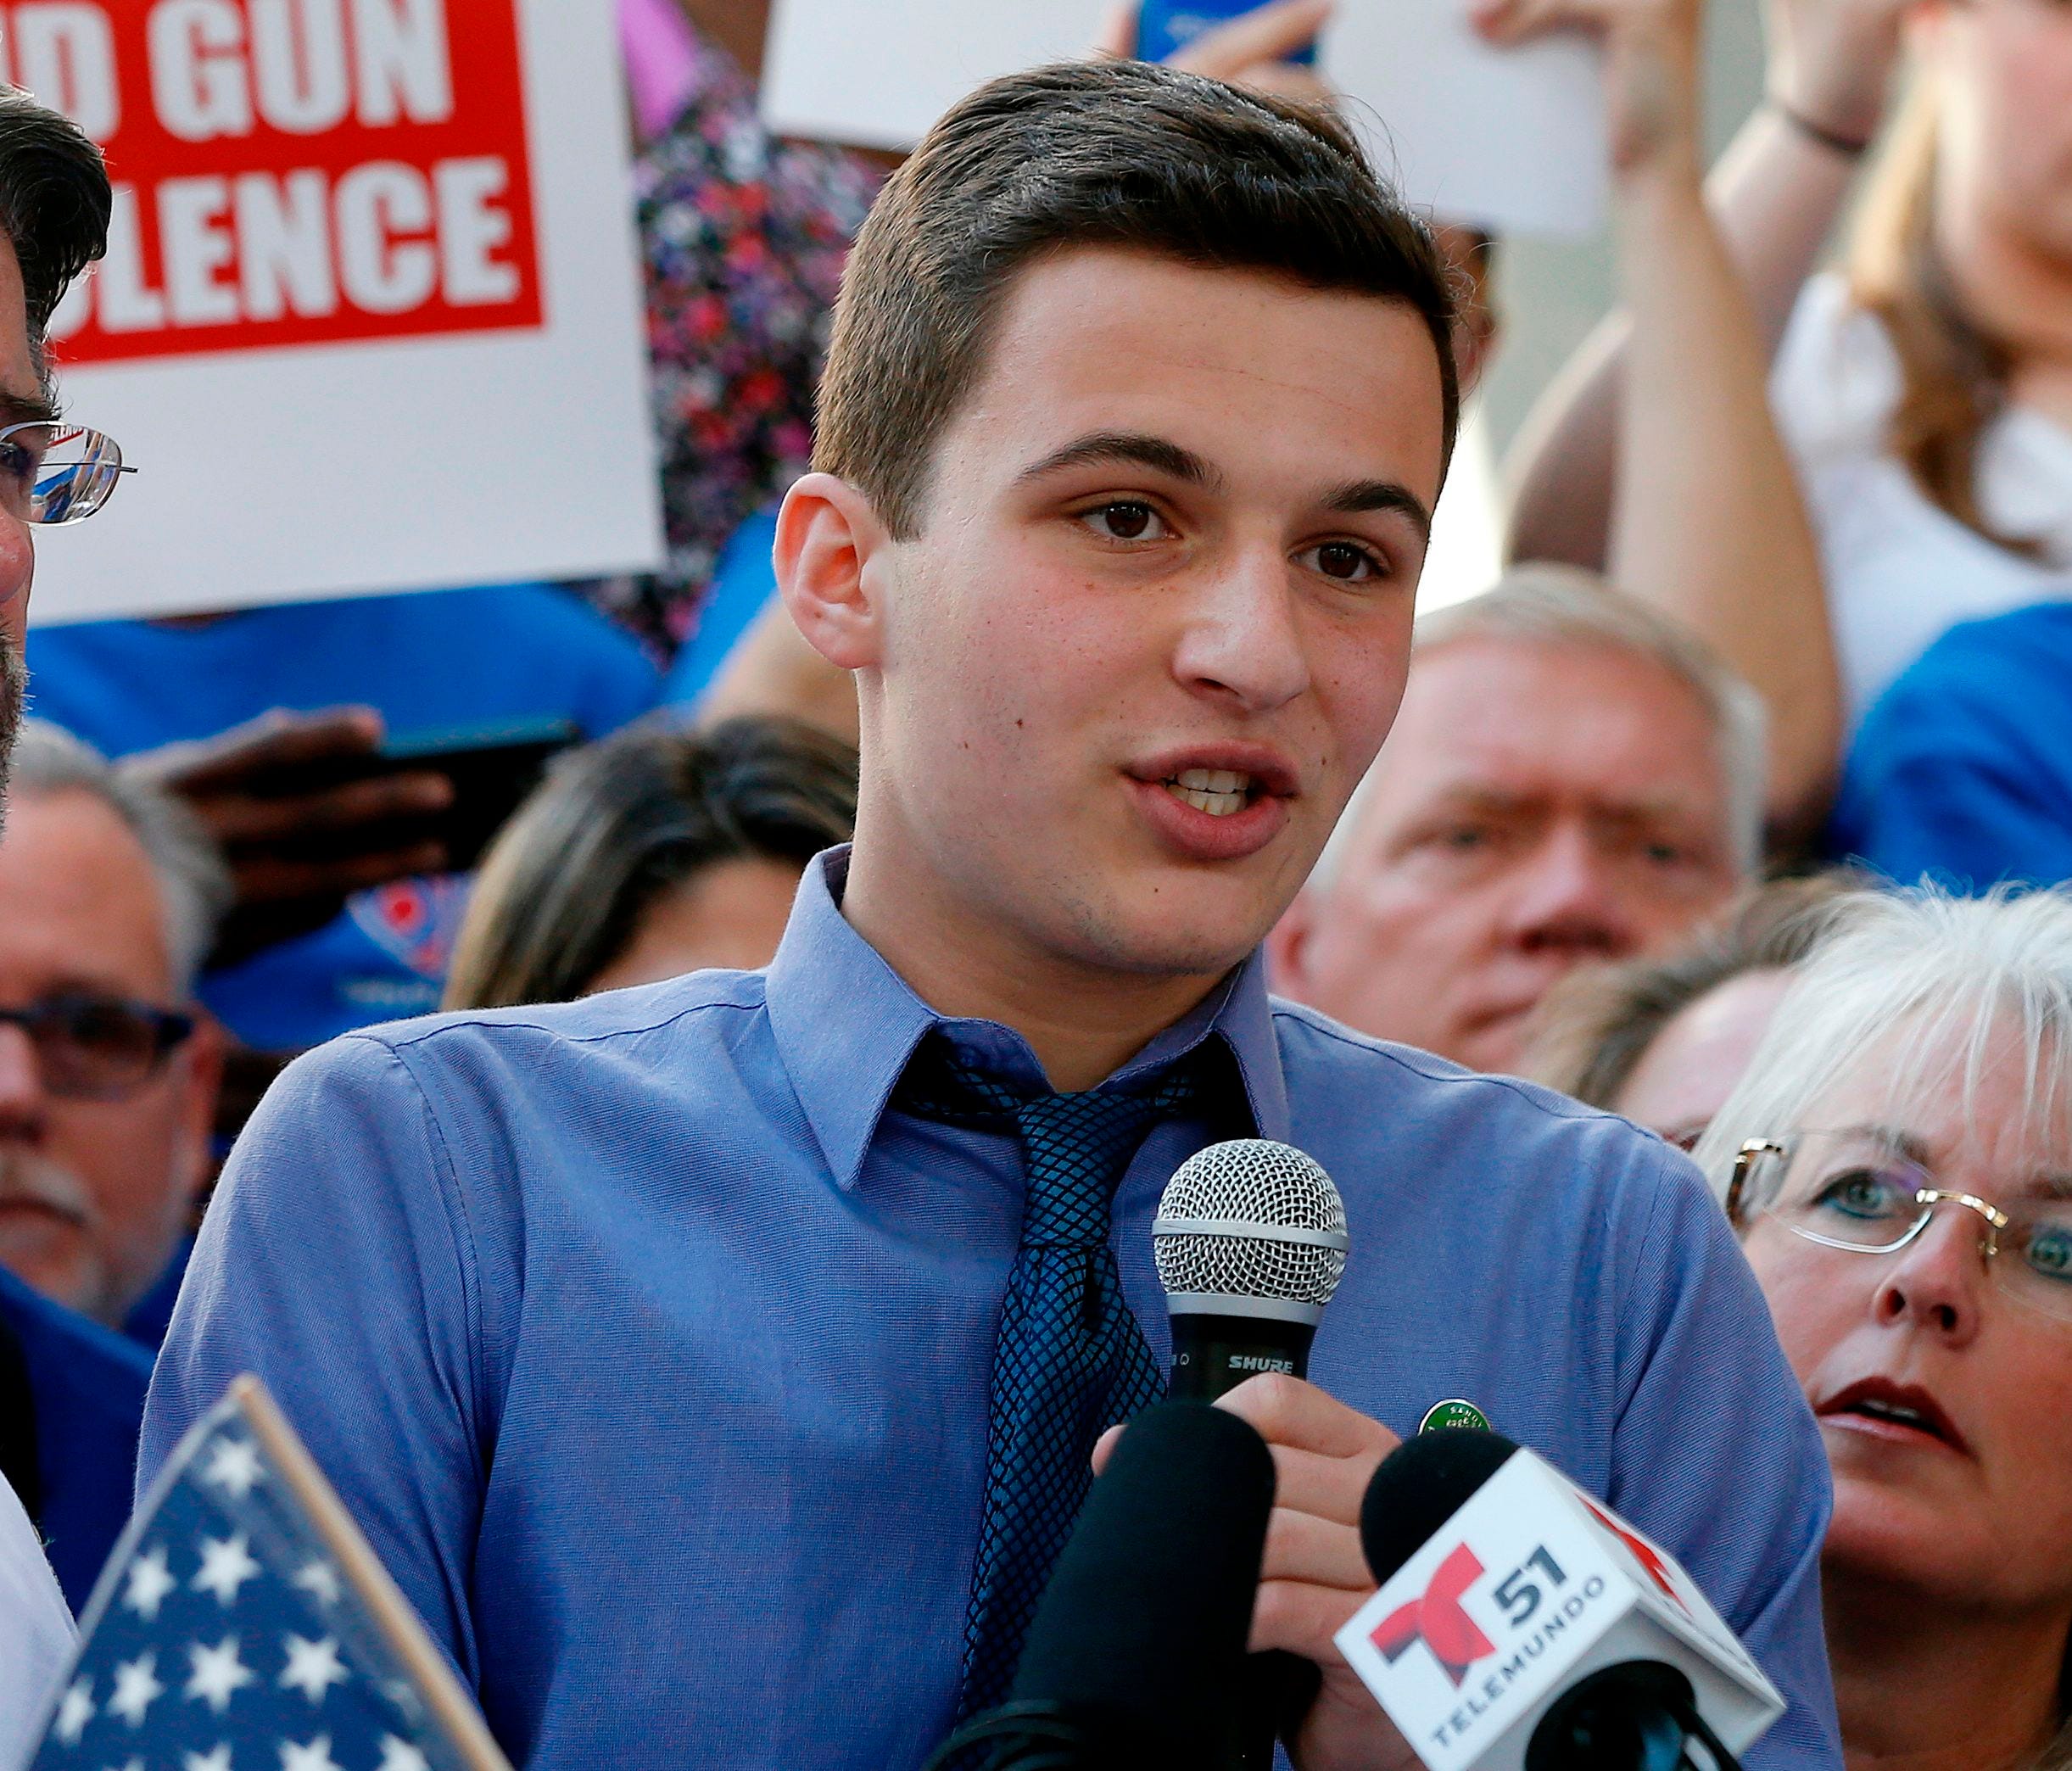 Marjory Stoneman Douglas High School student Cameron Kasky speaks at a rally for gun control at the Broward County Federal Courthouse in Fort Lauderdale, Fla. on February 17, 2018.